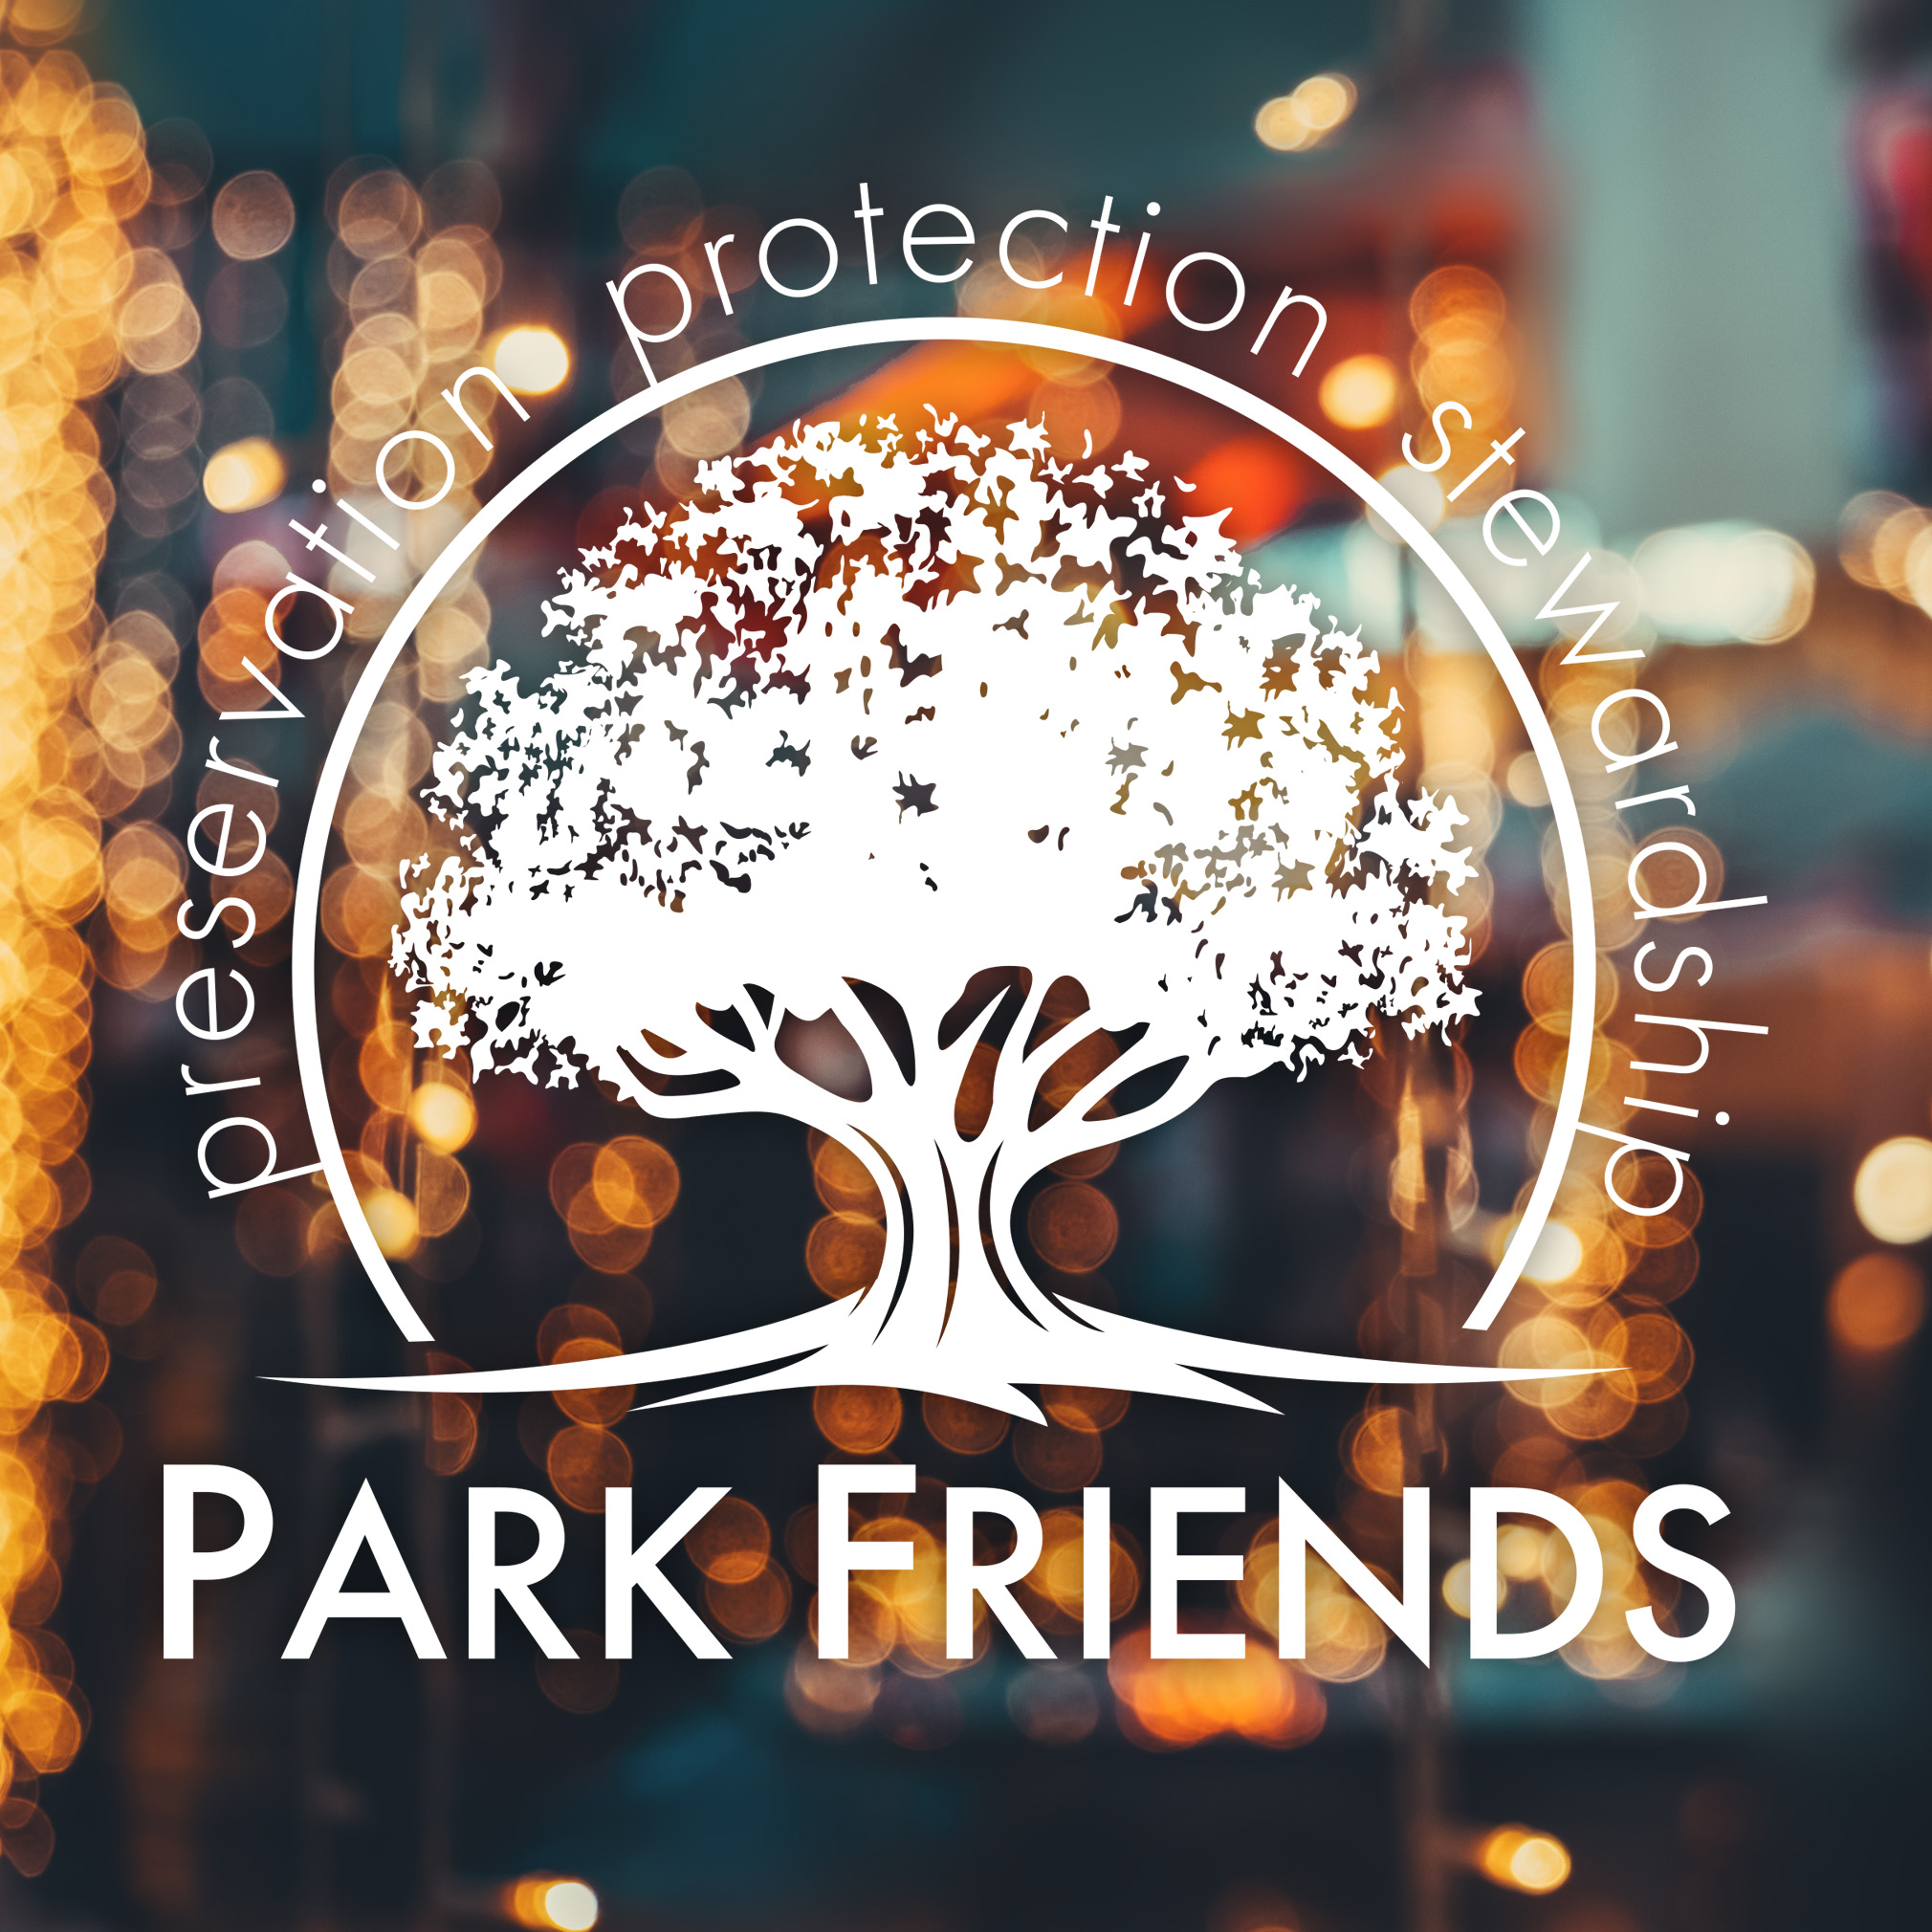 Park Friends Annual Party, February 8, 2025